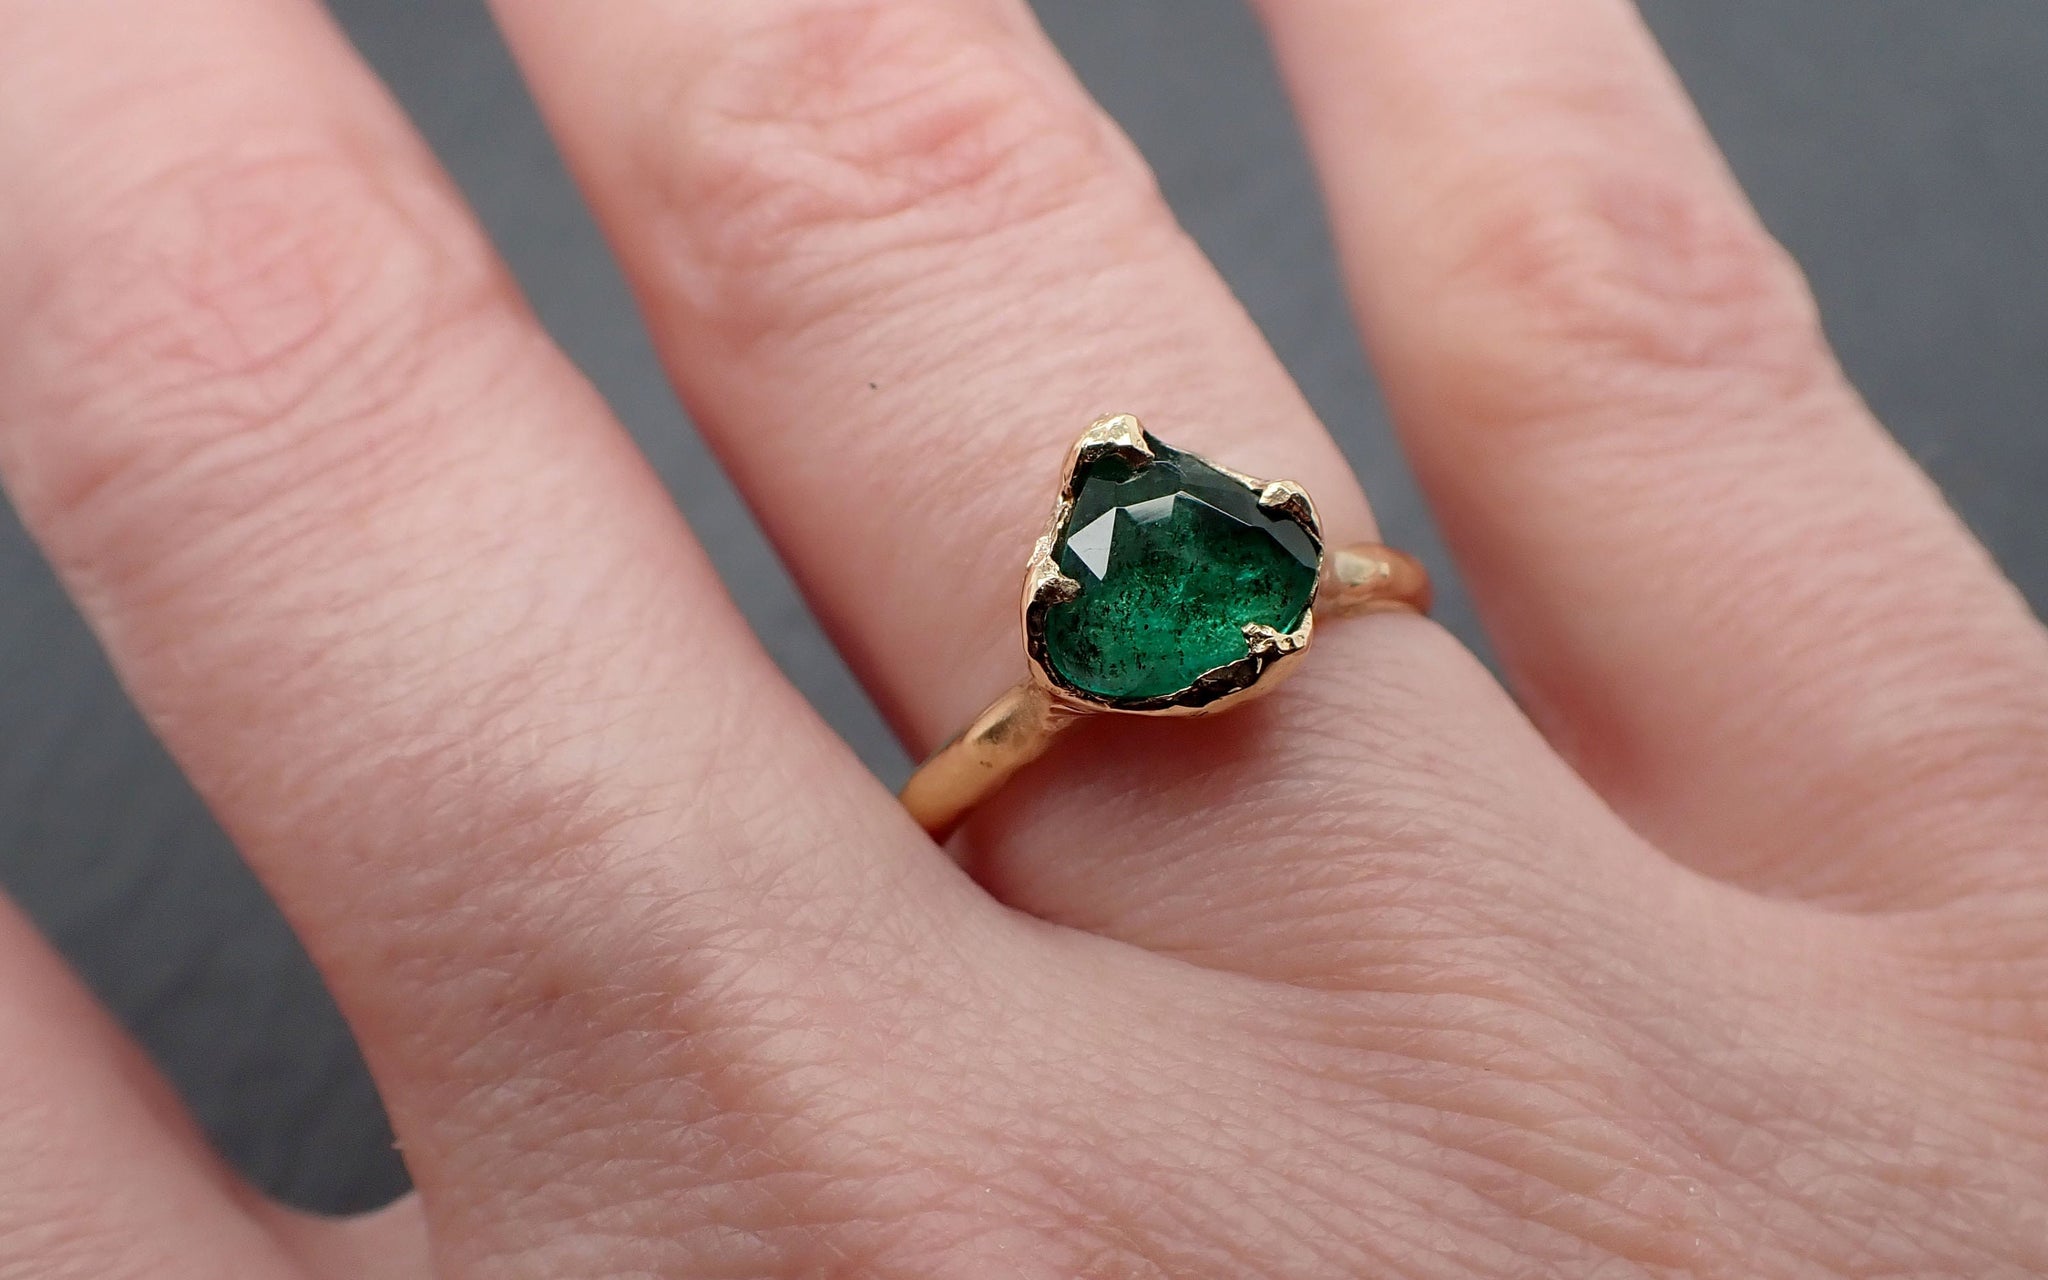 Fancy cut Emerald Solitaire yellow 18k Gold Ring Birthstone One Of a Kind Gemstone Ring Recycled 3325